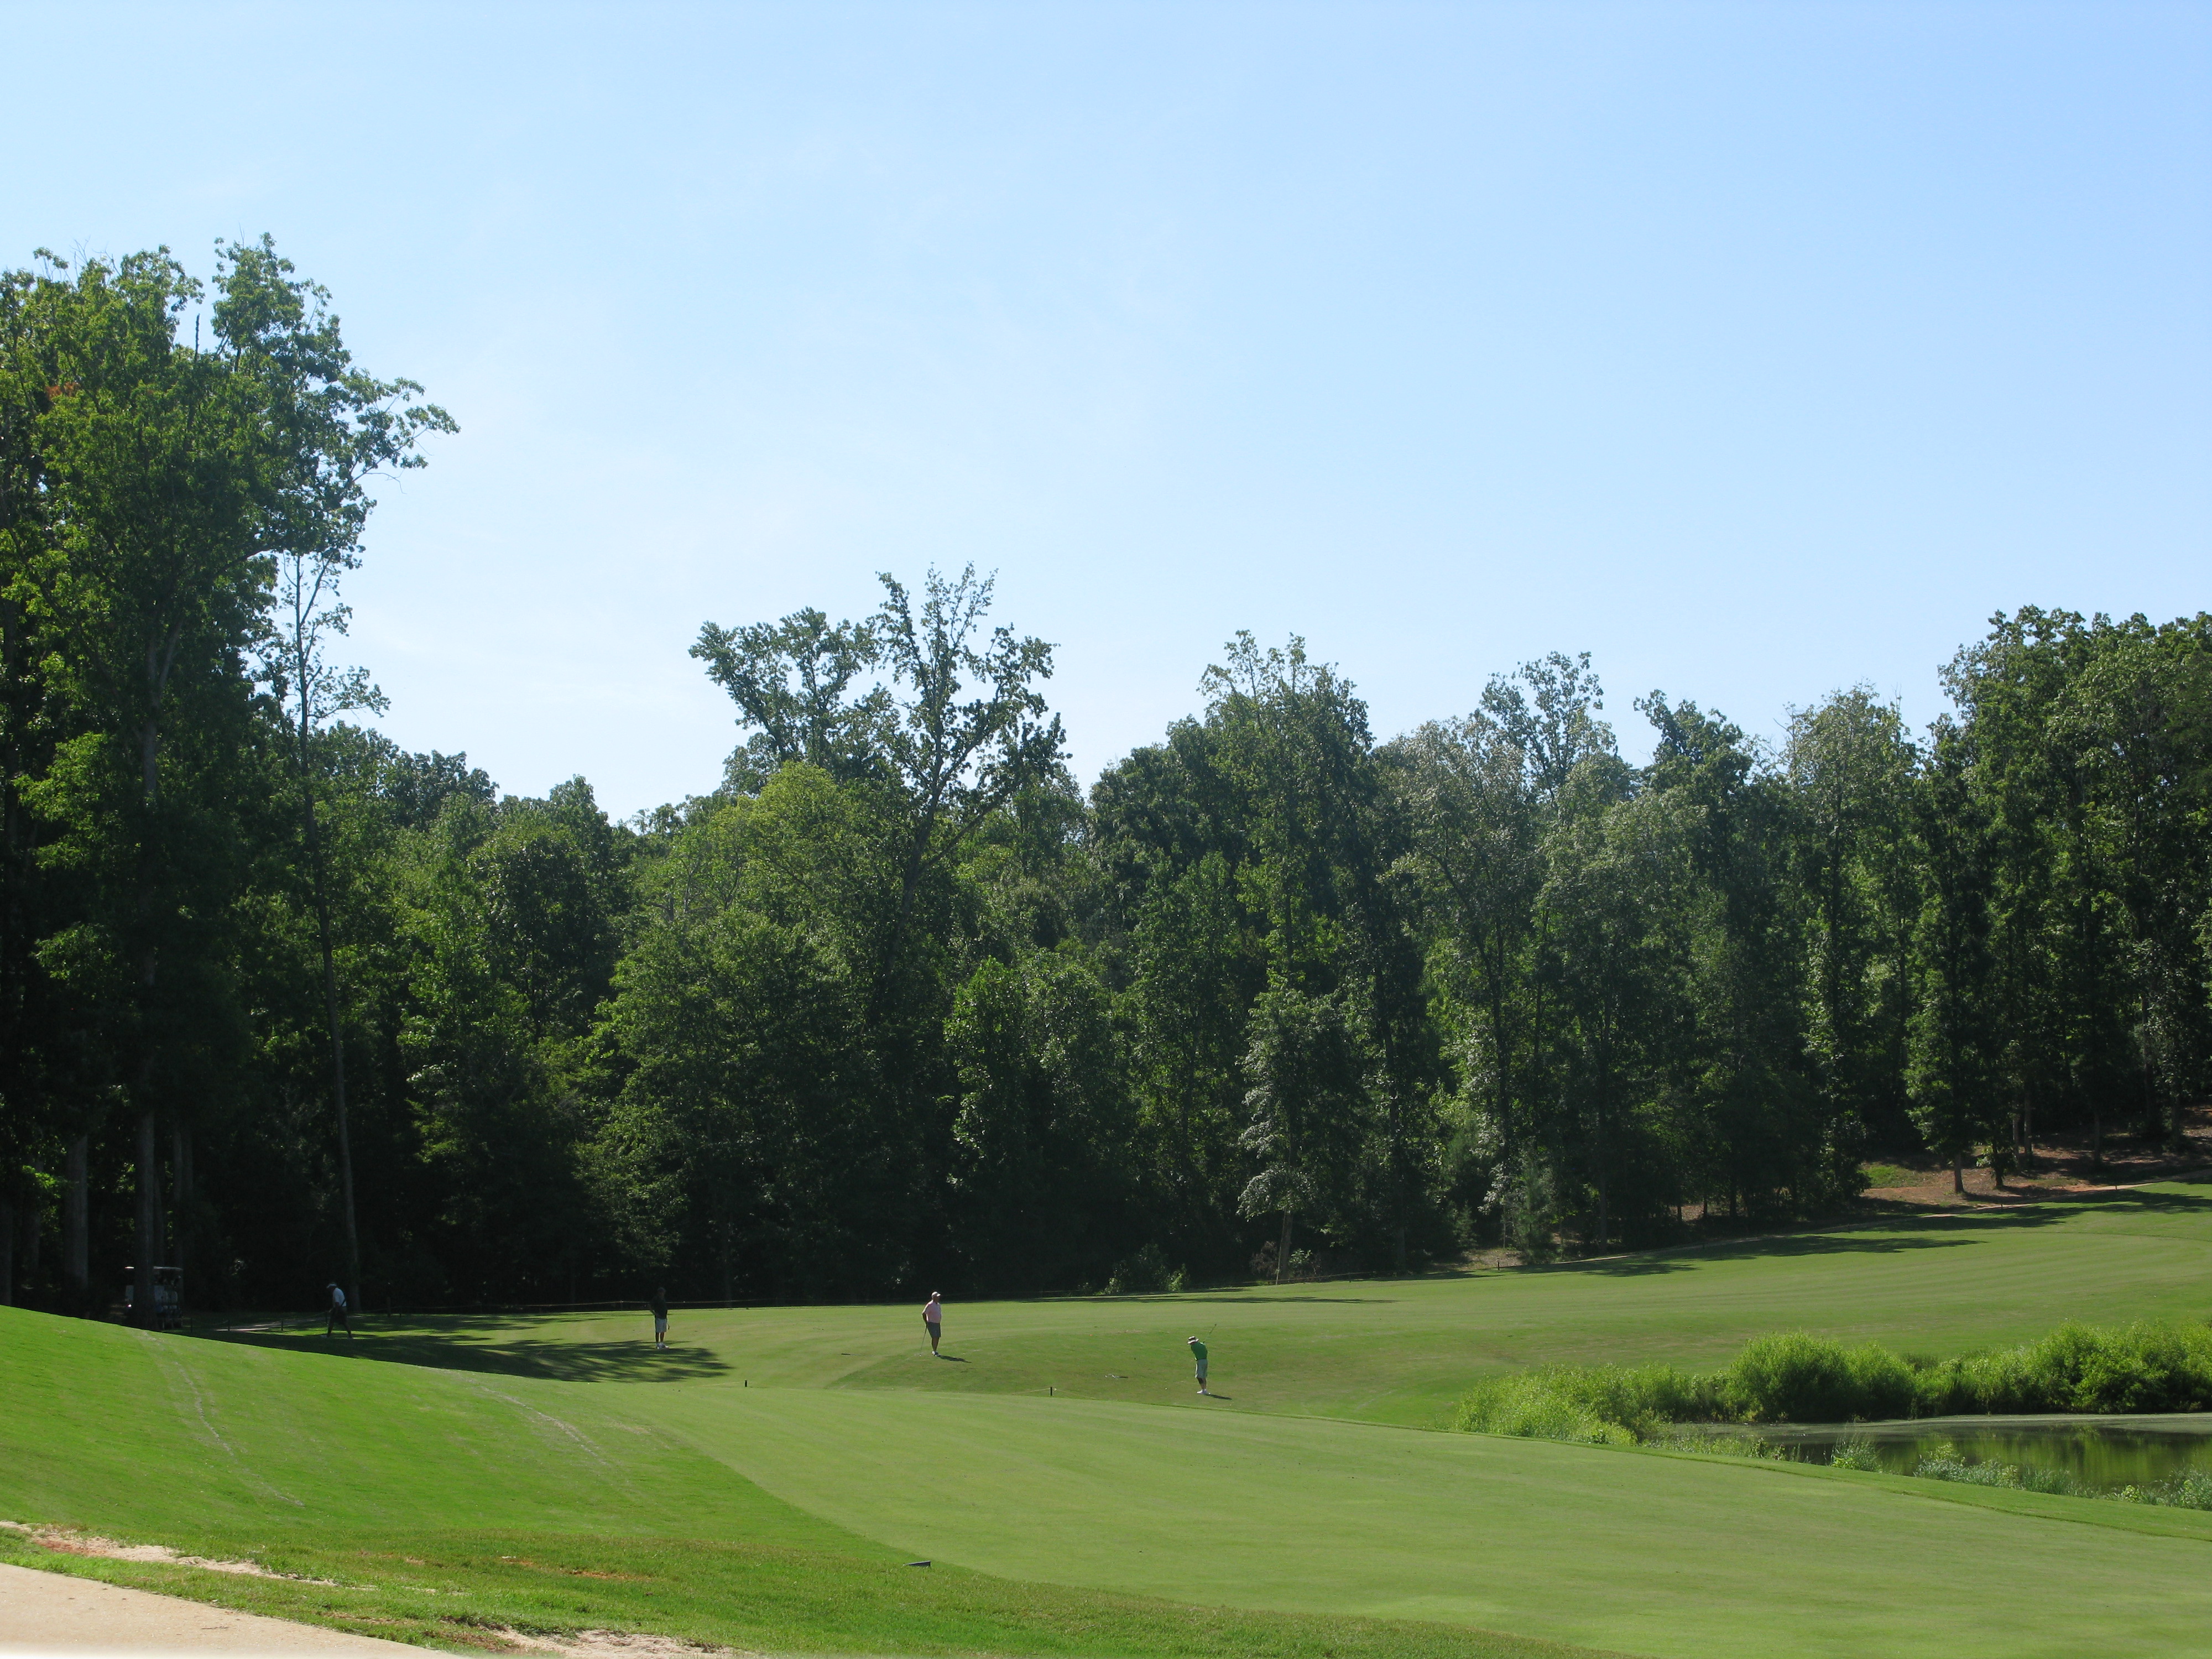 Golf course with trees